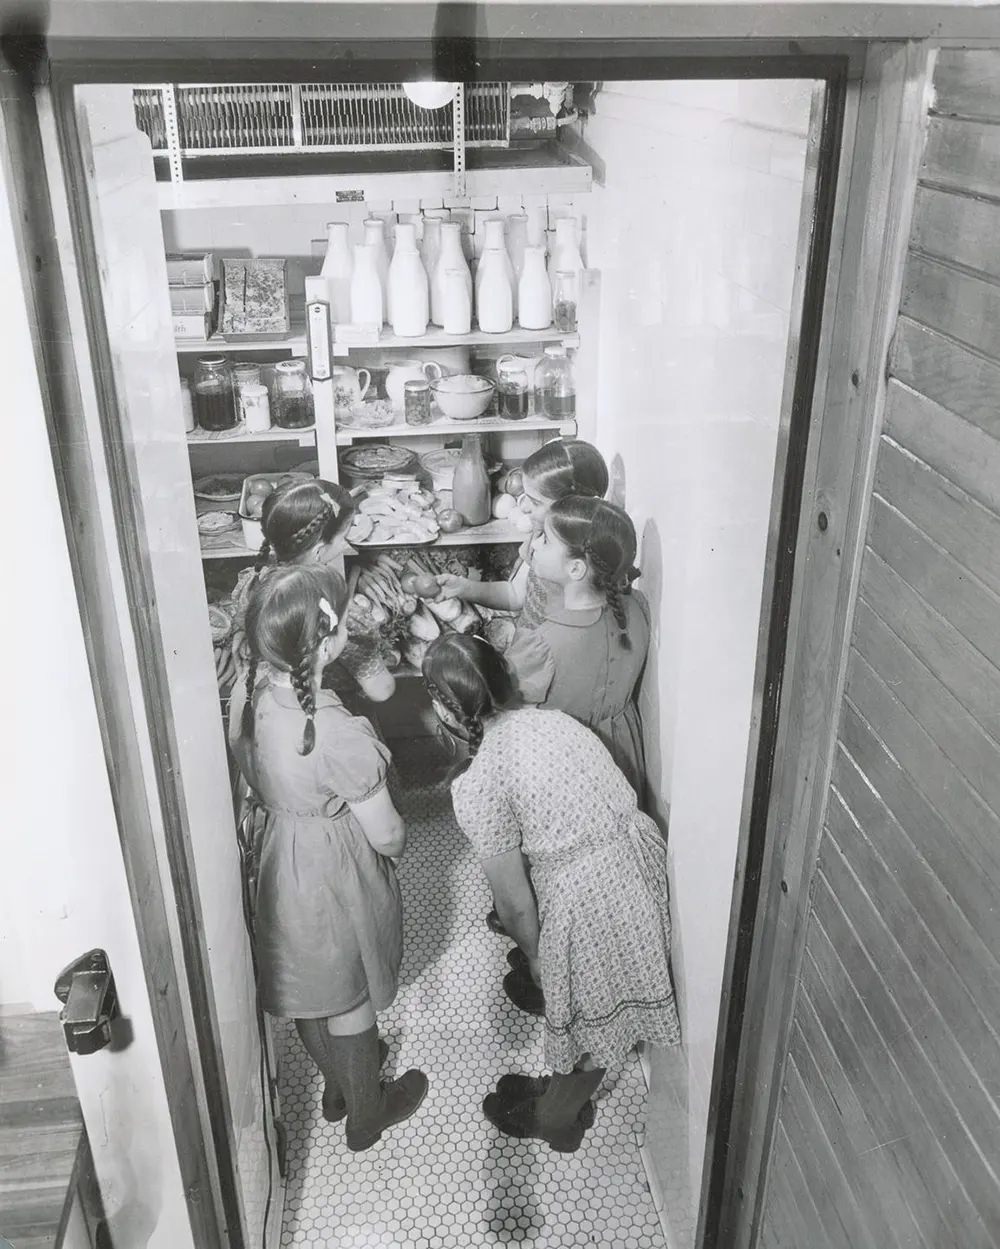 The 10-year-olds grab a snack from their refrigerator, 1944.